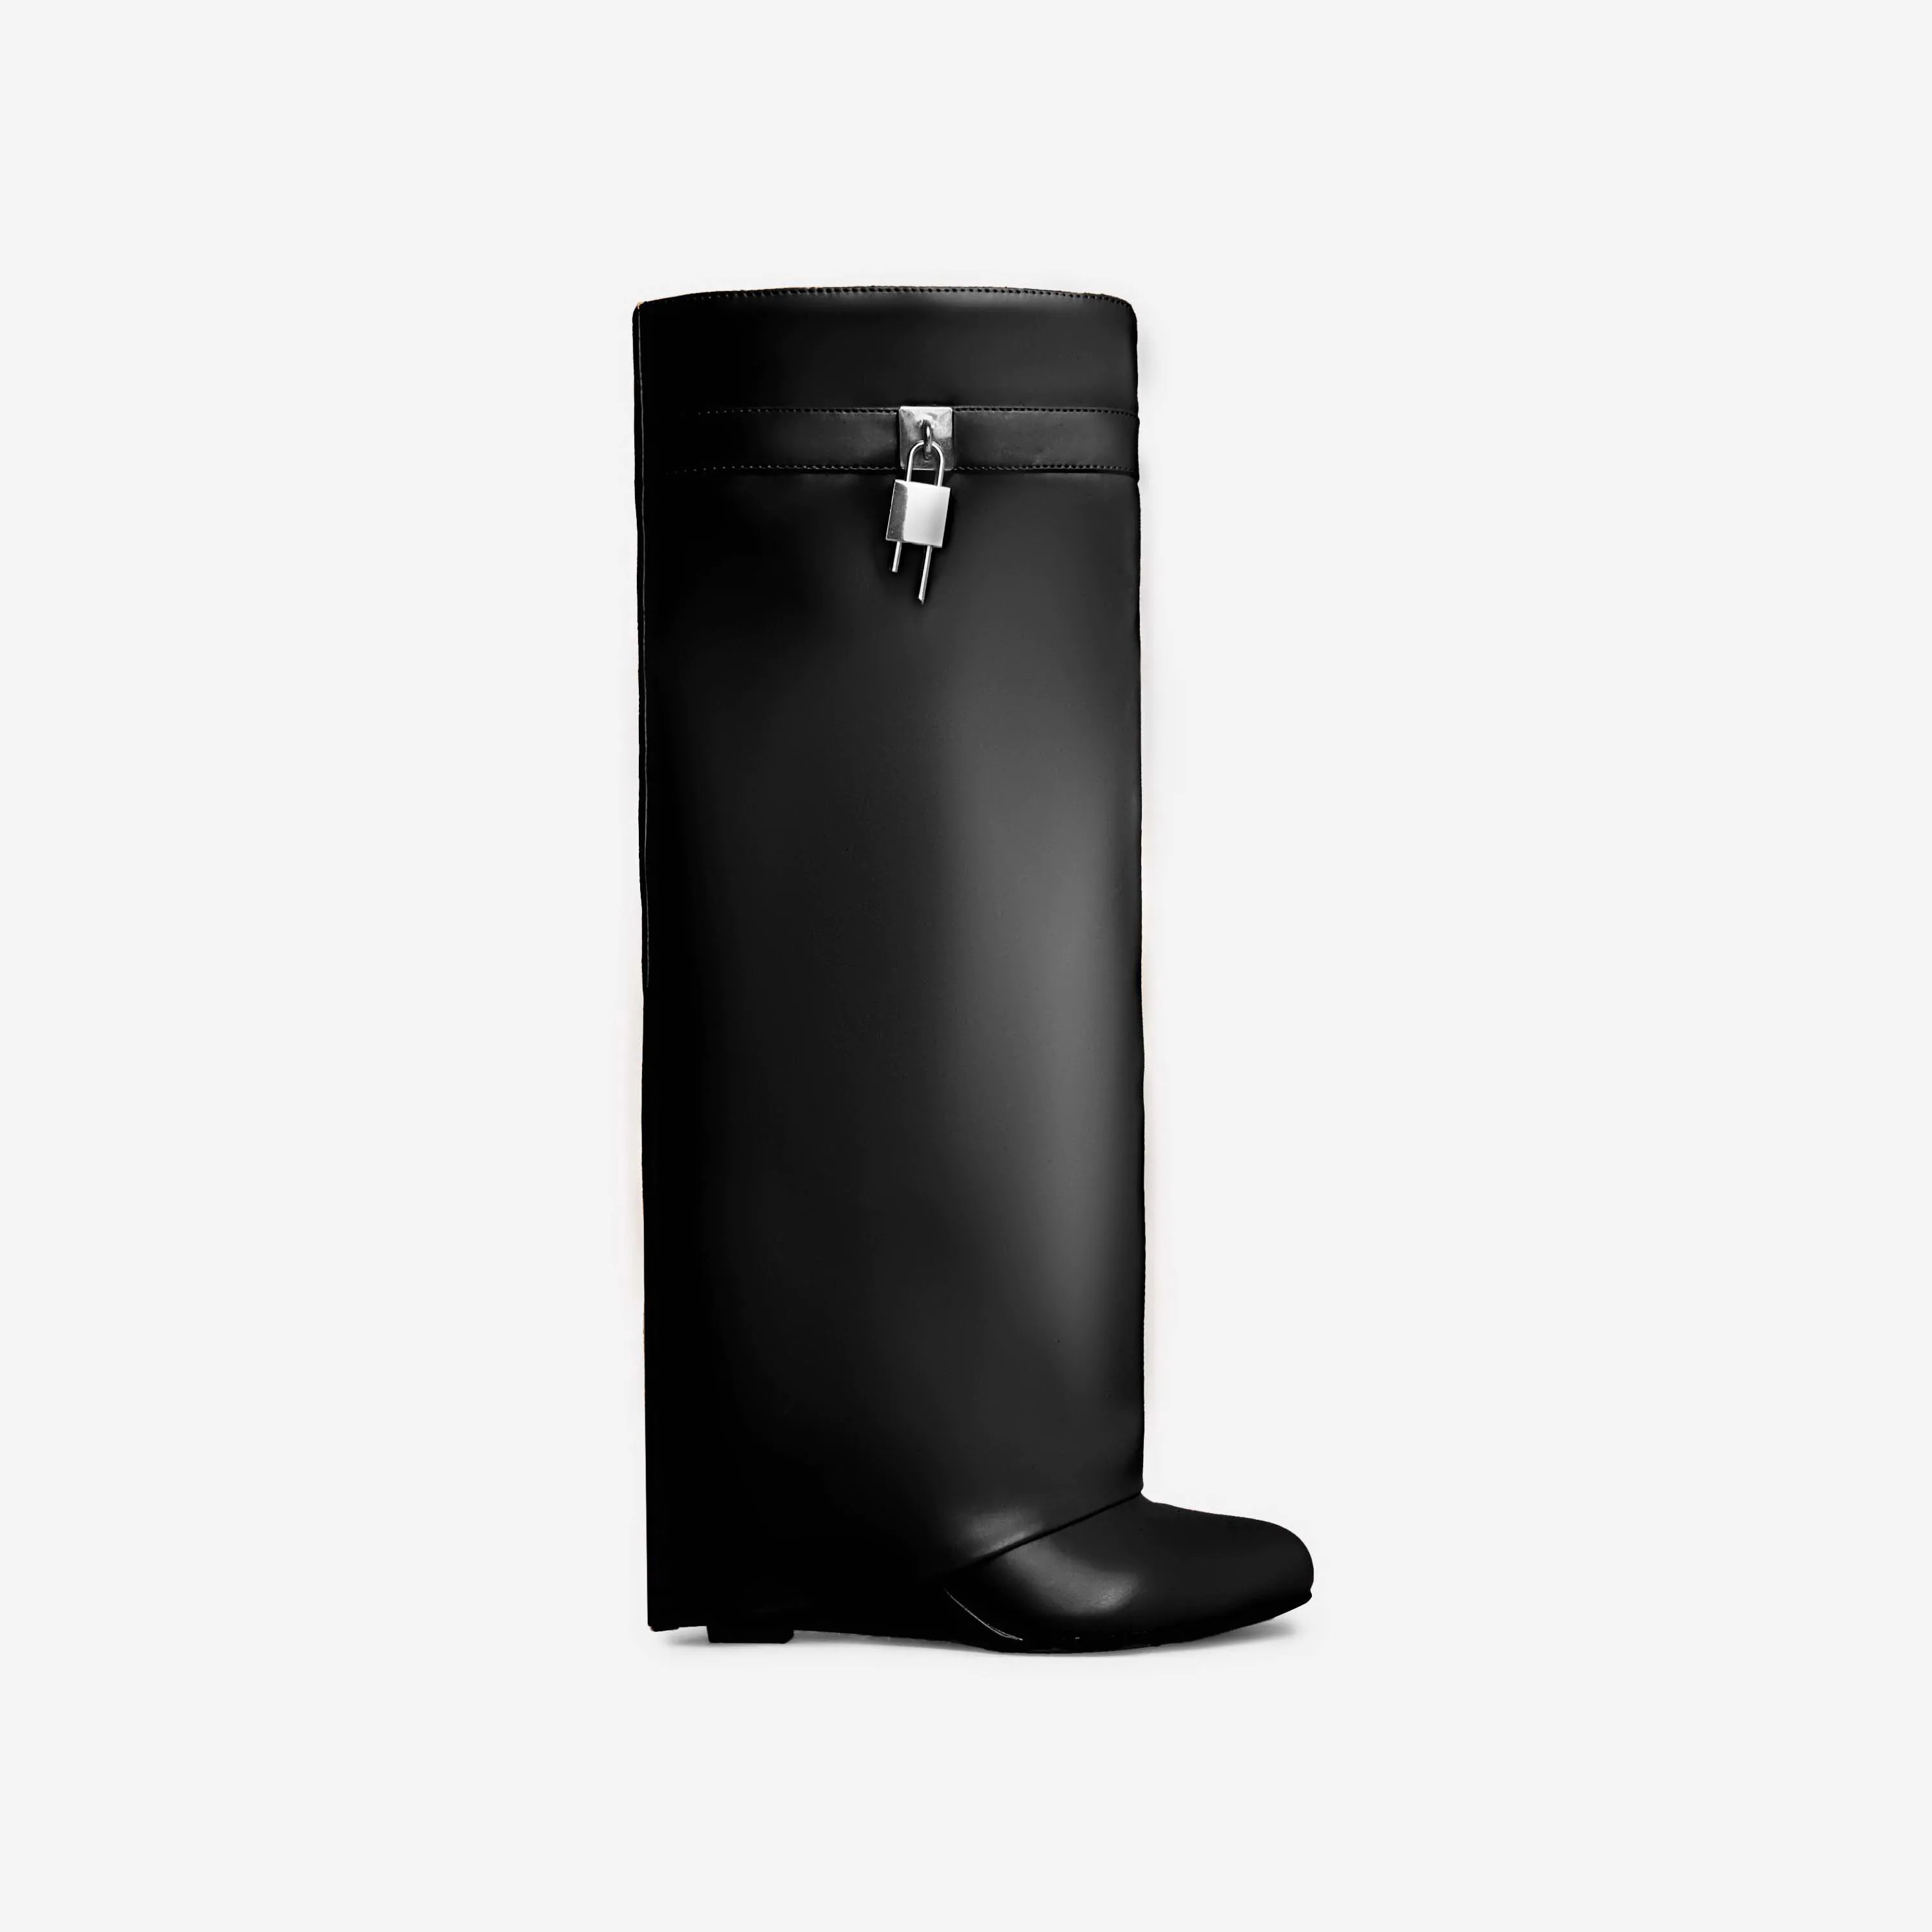 Givenchy shark lock boots dupe